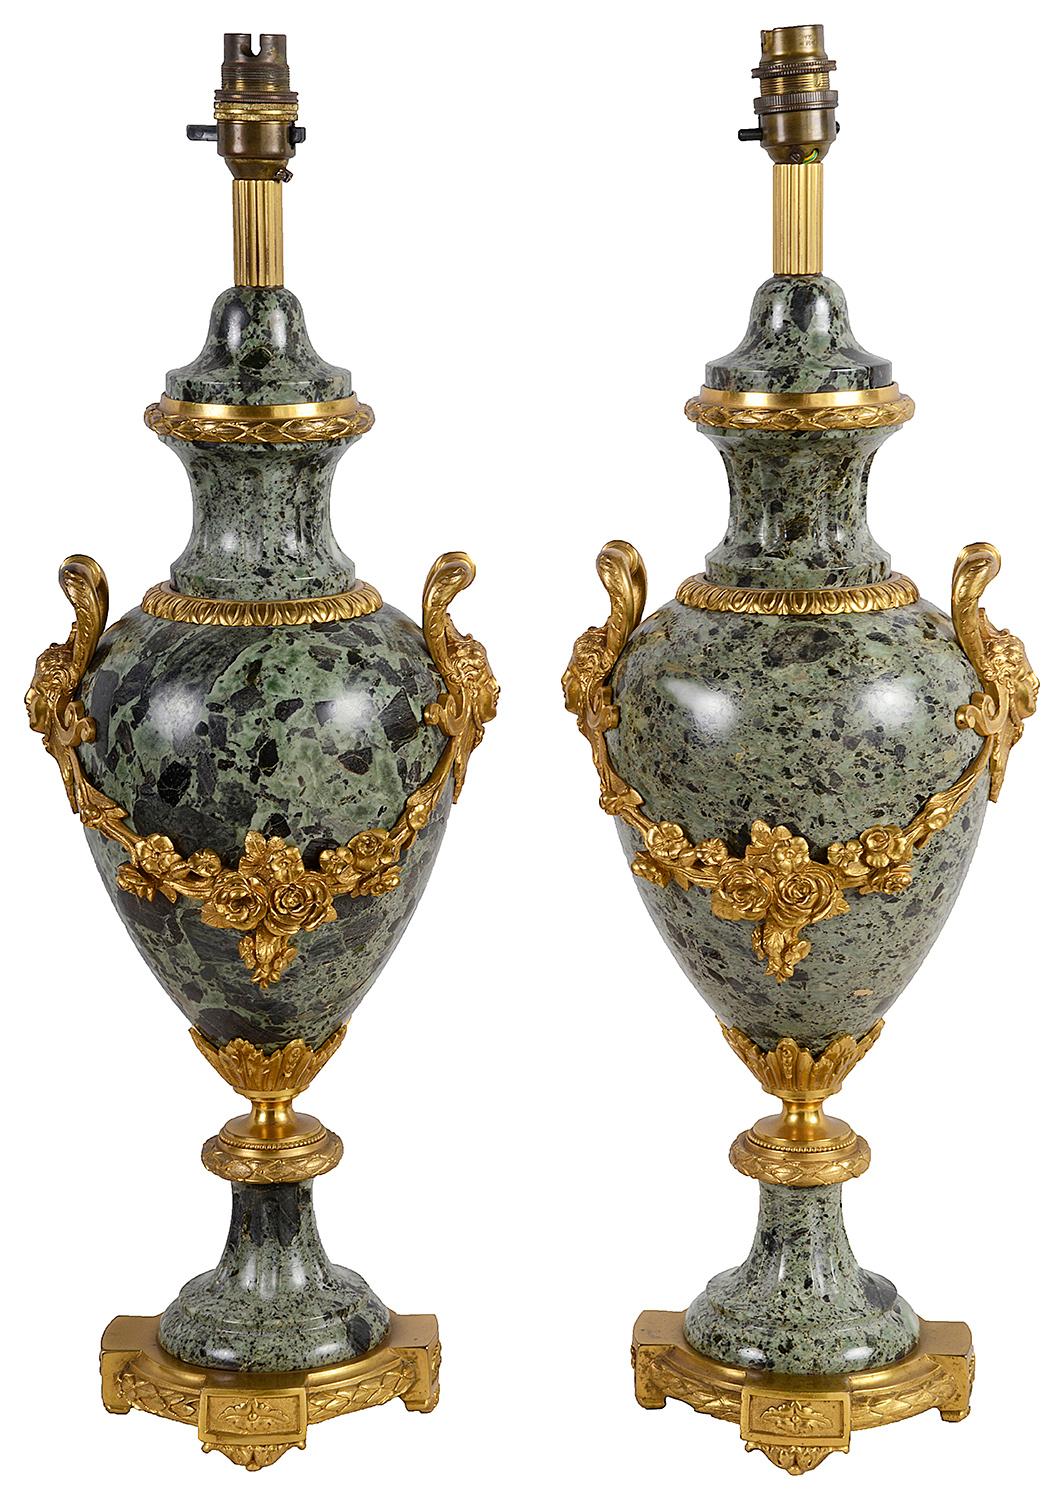 A good quality pair of late 19th century French green marble and gilded Ormolu vases / lamps. Each with classical mask mounts below the handles, garlands of flowers and raised on pedestal bases, terminating on Ormolu plinths. Measures: 46cm (18